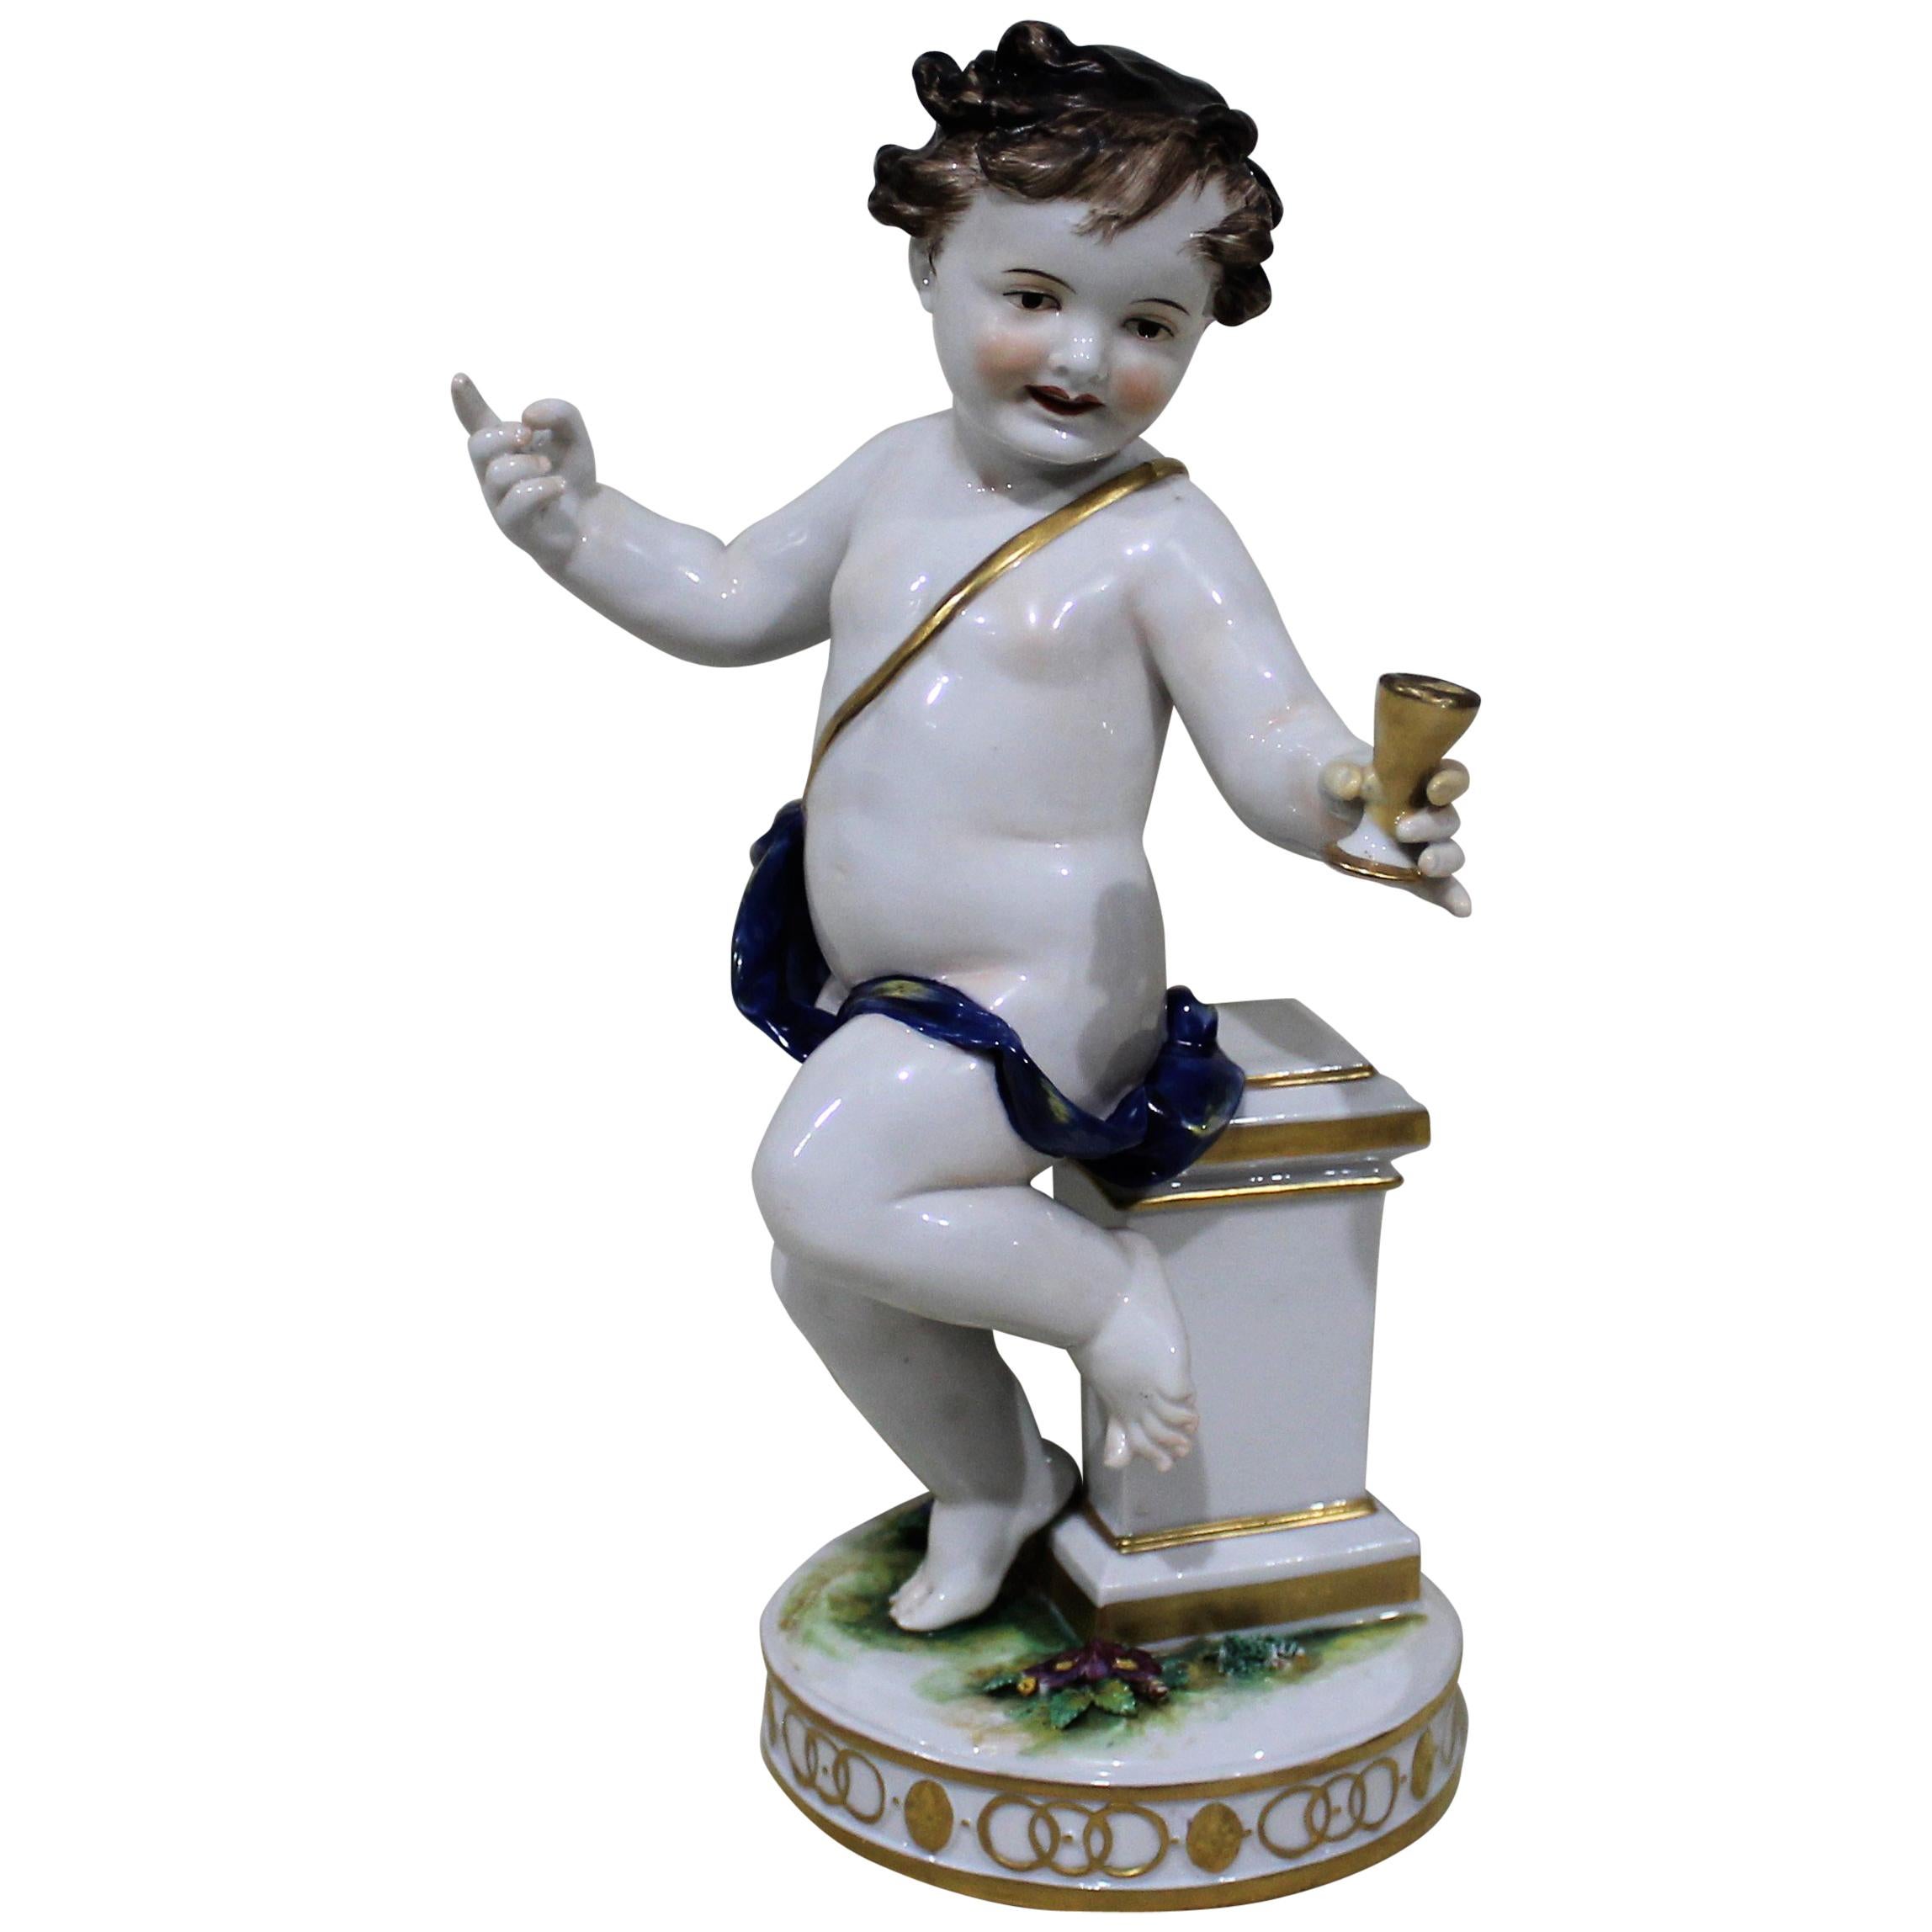 18th Century Ludwigsburg Porcelain Figure of Young Bacchus from Roman Mythology